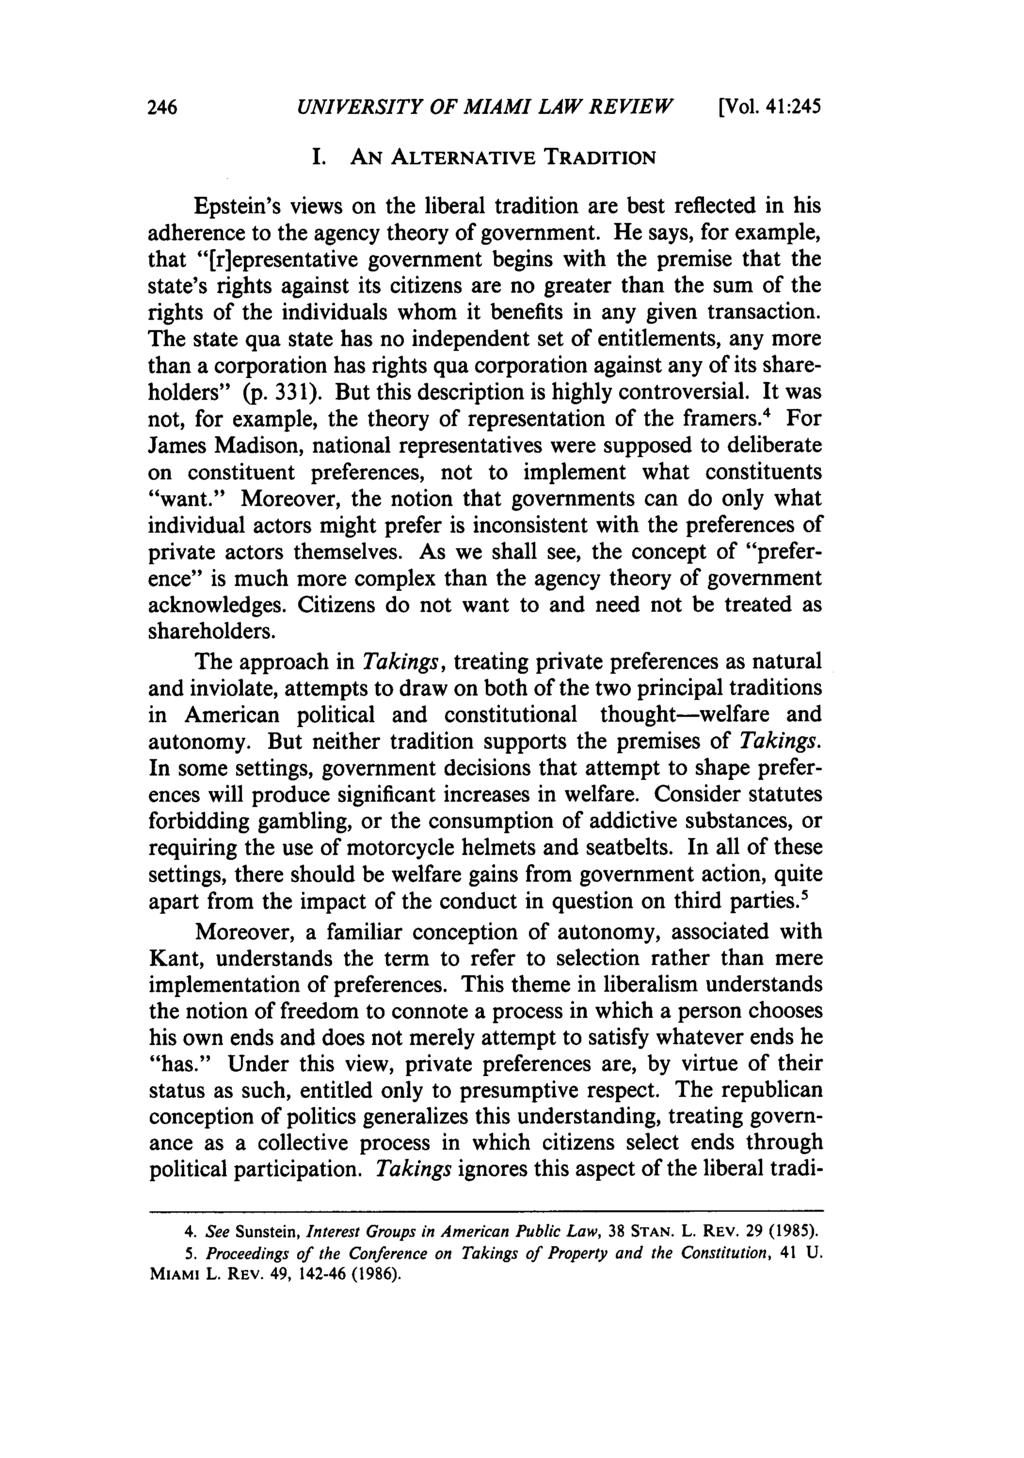 UNIVERSITY OF MIAMI LAW REVIEW [Vol. 41:245 I. AN ALTERNATIVE TRADITION Epstein's views on the liberal tradition are best reflected in his adherence to the agency theory of government.